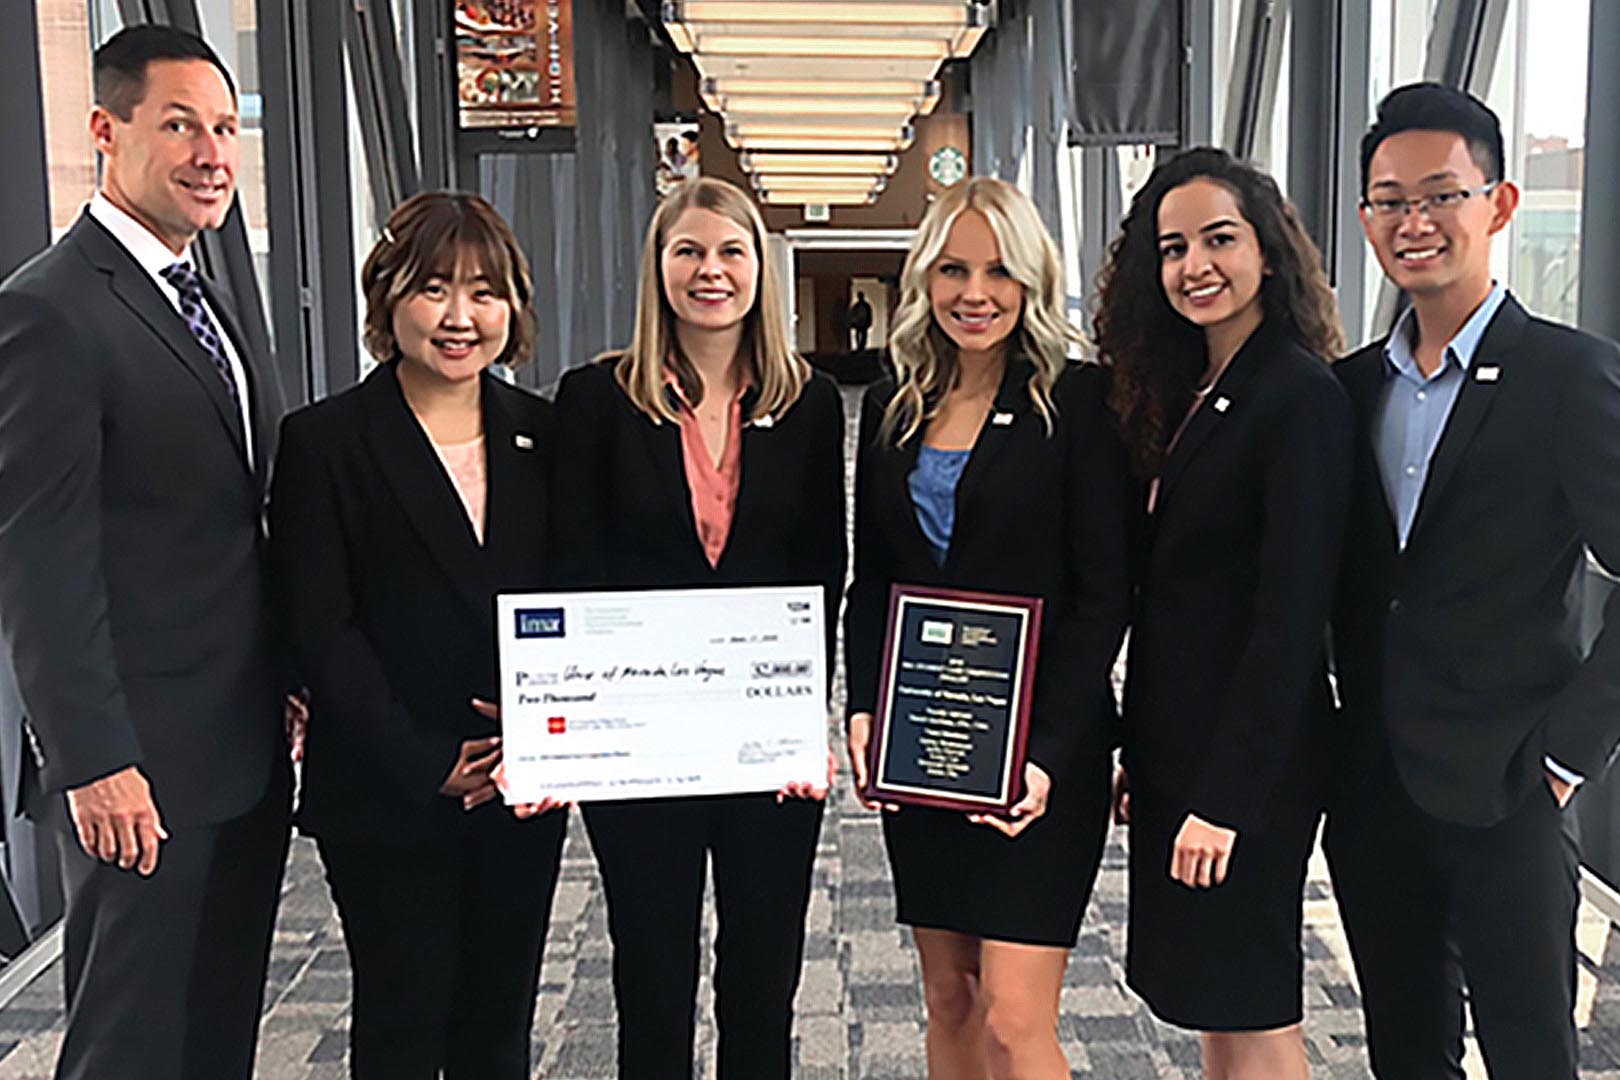 Winners of the 2018 Student Case Competition